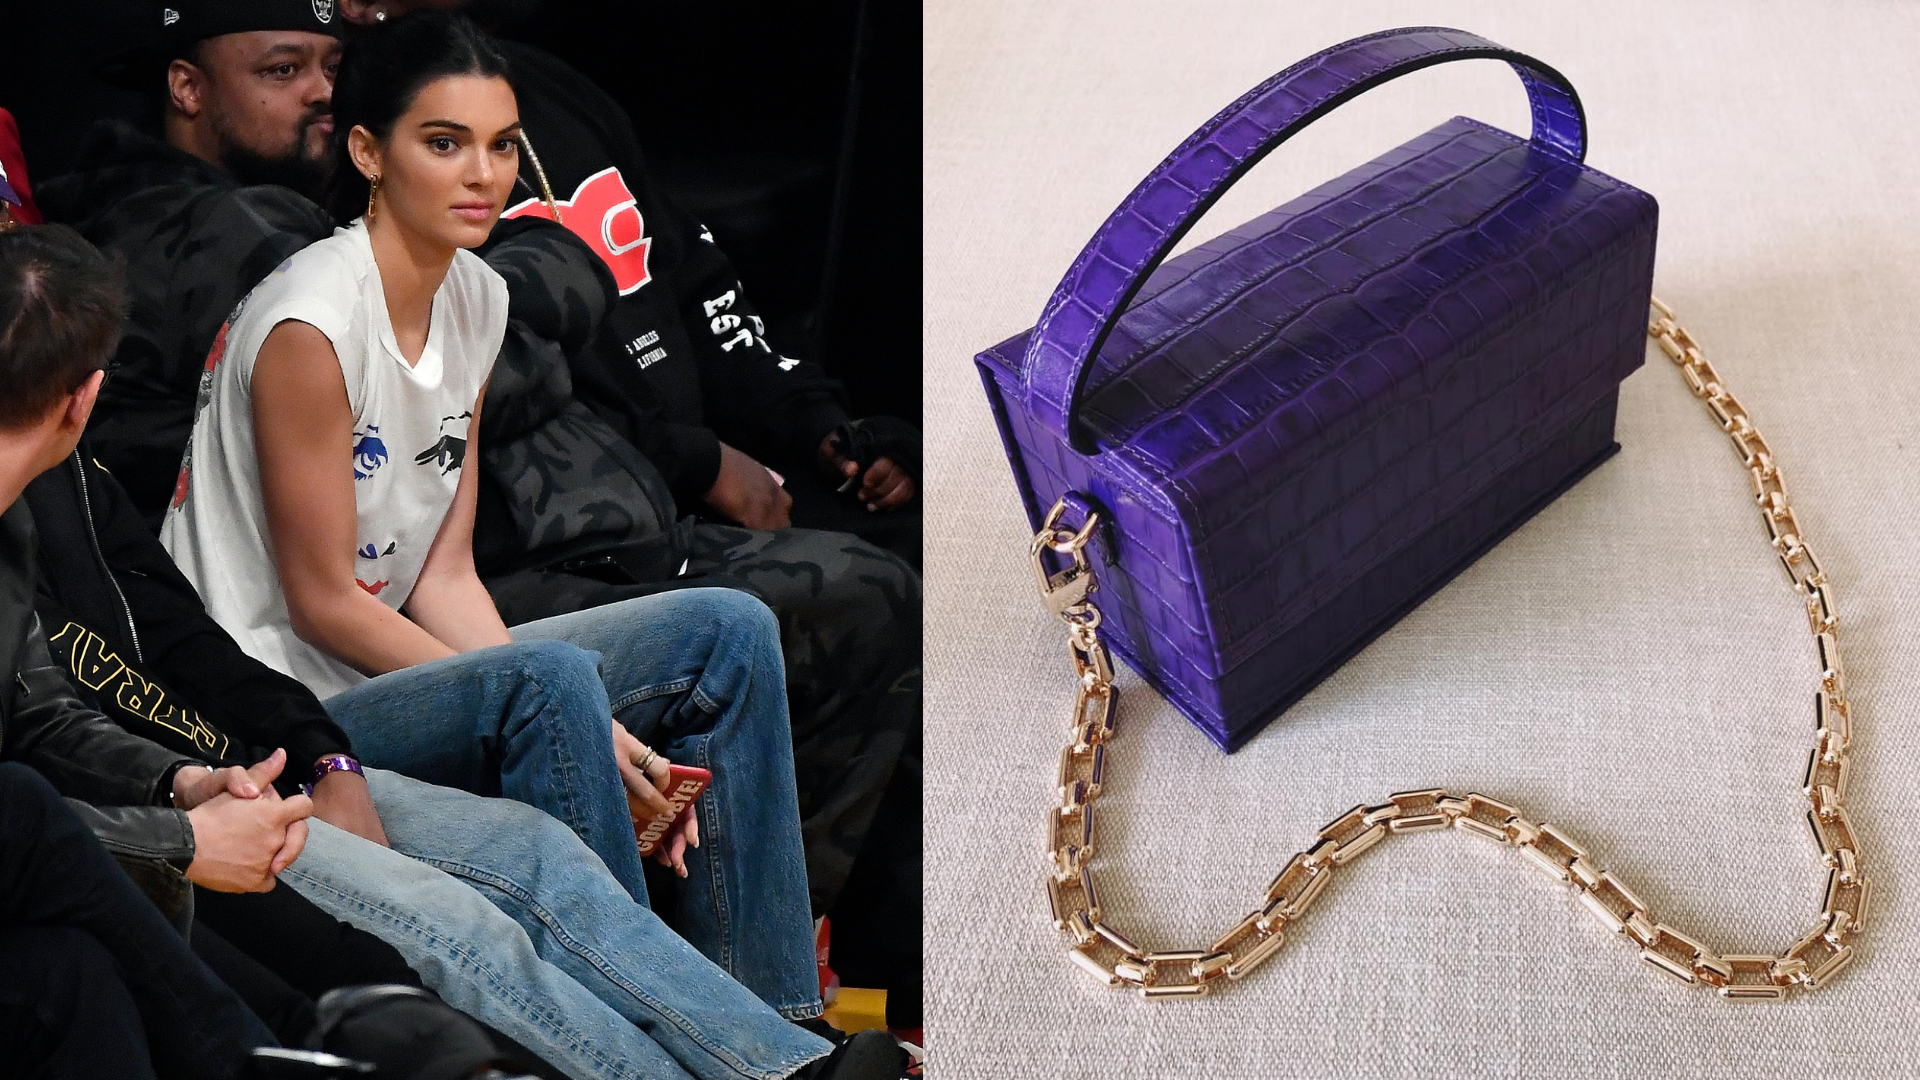 Where To Get Your Hands On Kendall Jenner's €40 Handbag